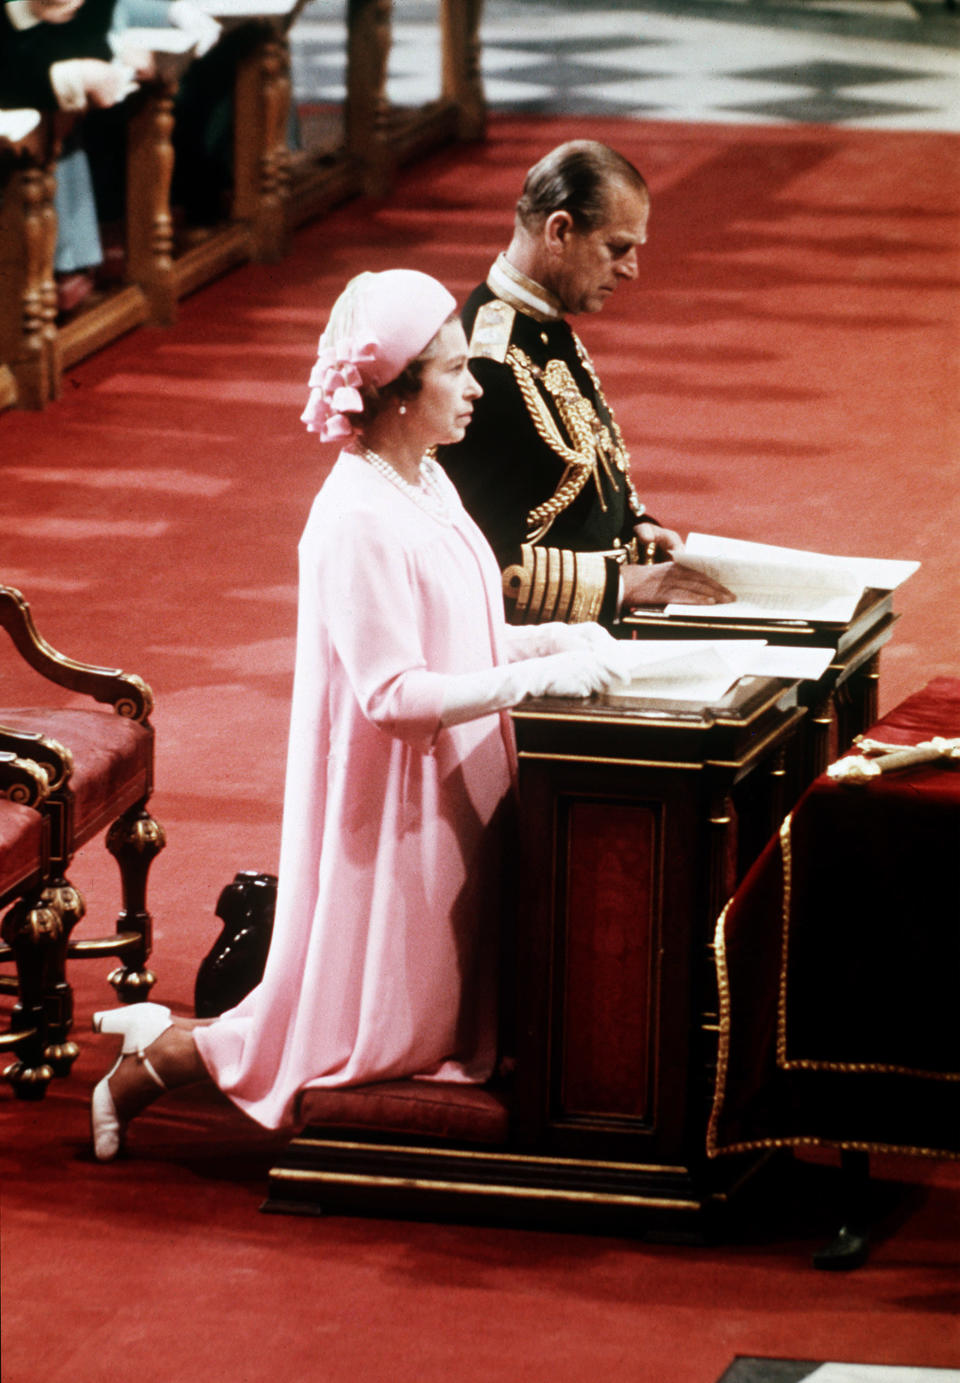 FILE - Britain's Queen Elizabeth II kneels with her husband Prince Philip, the Duke of Edingburgh, at St. Pauls's Cathedral, Parish Church of the City of London, during her Silver Jubilee celebrations, June 7, 1977. Queen Elizabeth II, Britain’s longest-reigning monarch and a rock of stability across much of a turbulent century, has died. She was 96. Buckingham Palace made the announcement in a statement on Thursday Sept. 8, 2022. (Pool via AP, File)